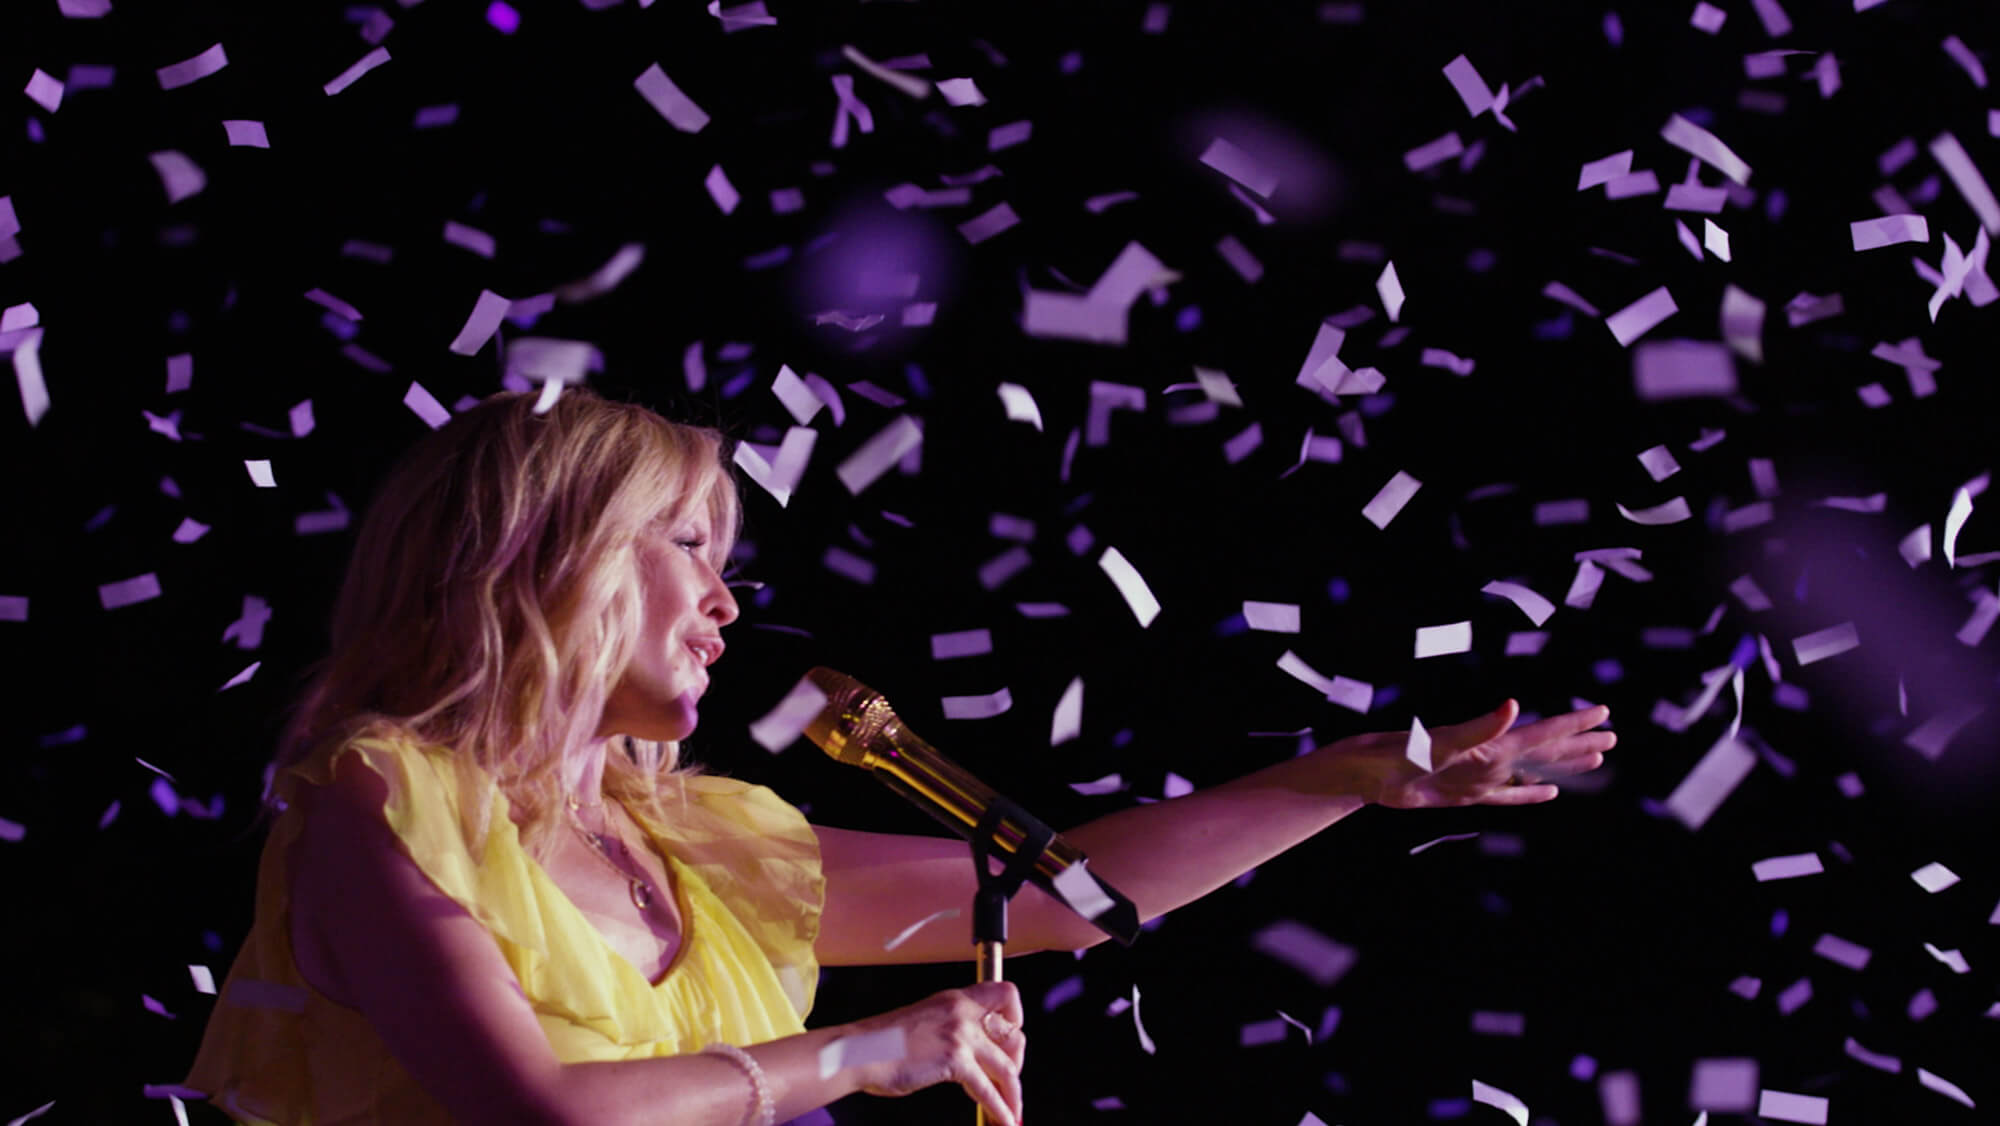 Kylie Minogue singing at night surrounded by confetti at the News UK Cannes Château, from the Rise Media case studies archive